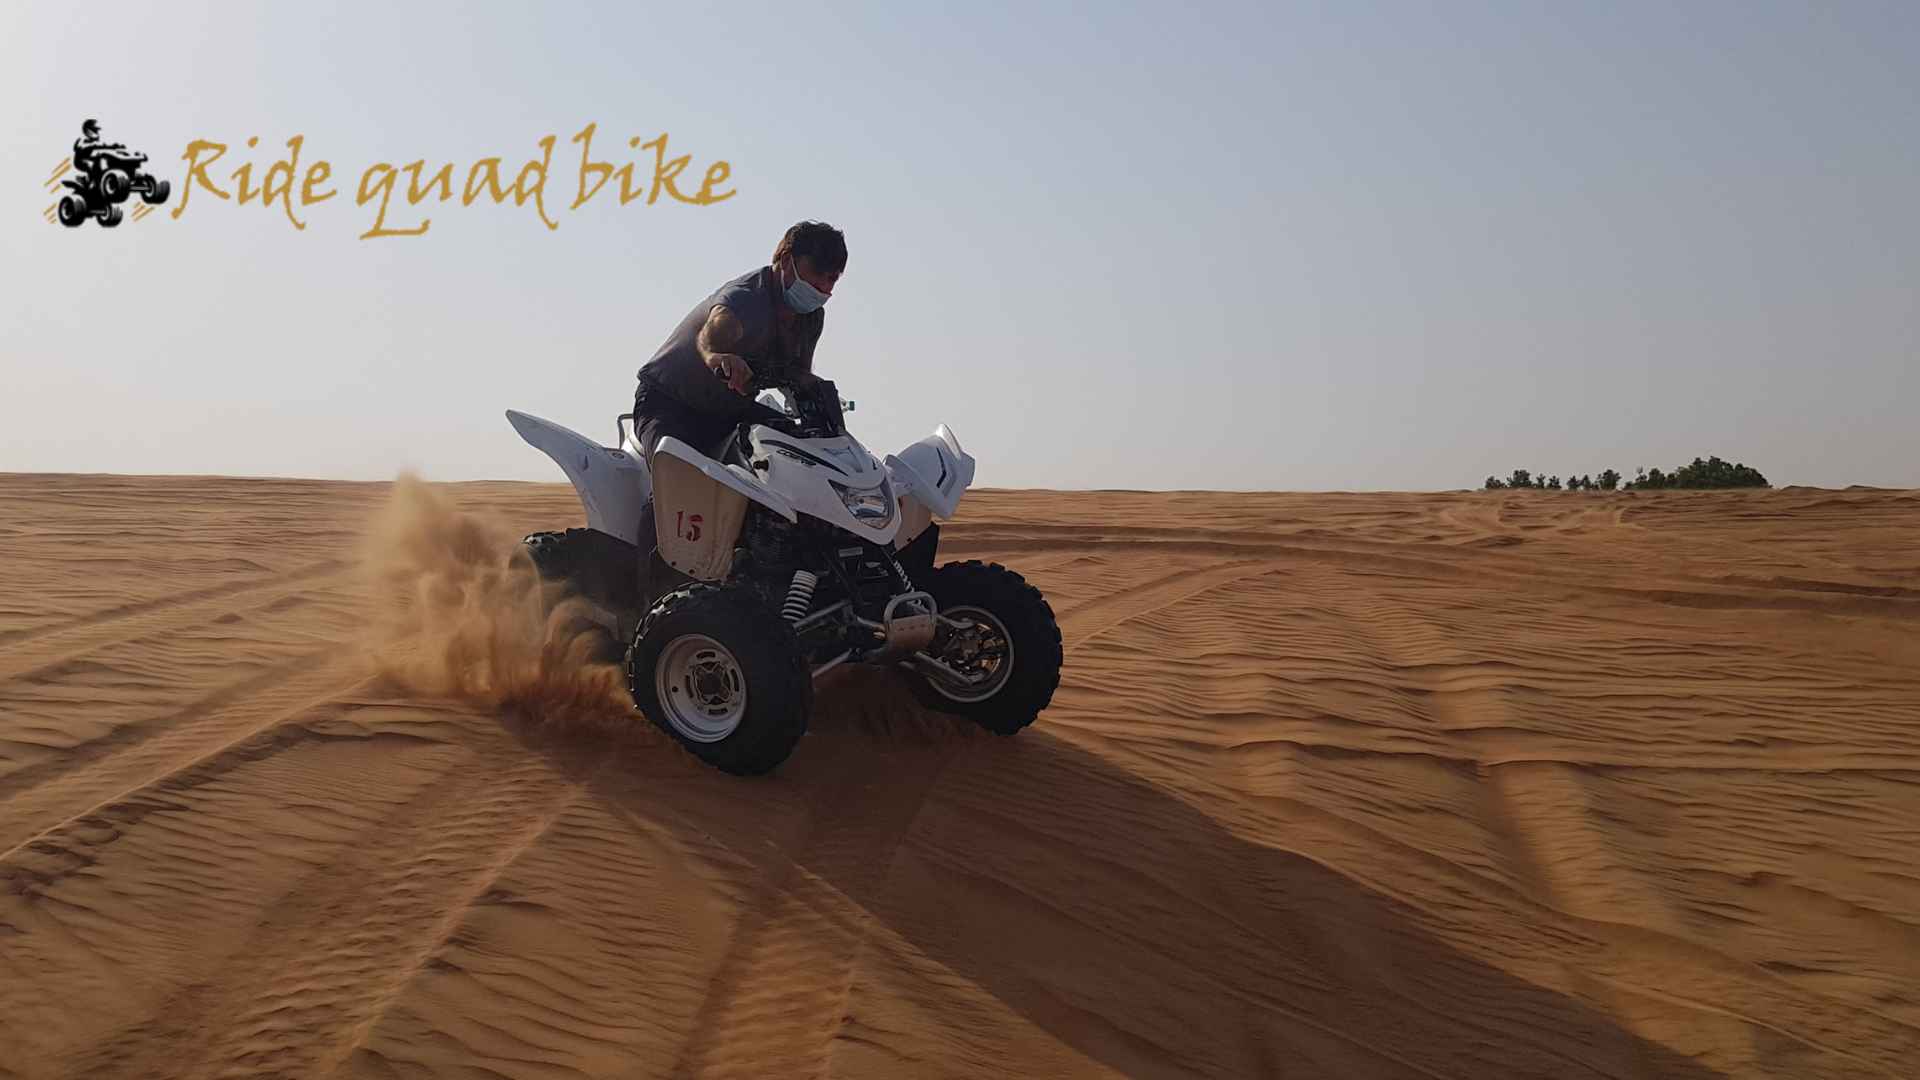 About | Ride Quad Bike, ATV is The Best Traveling Company in Dubai UAE